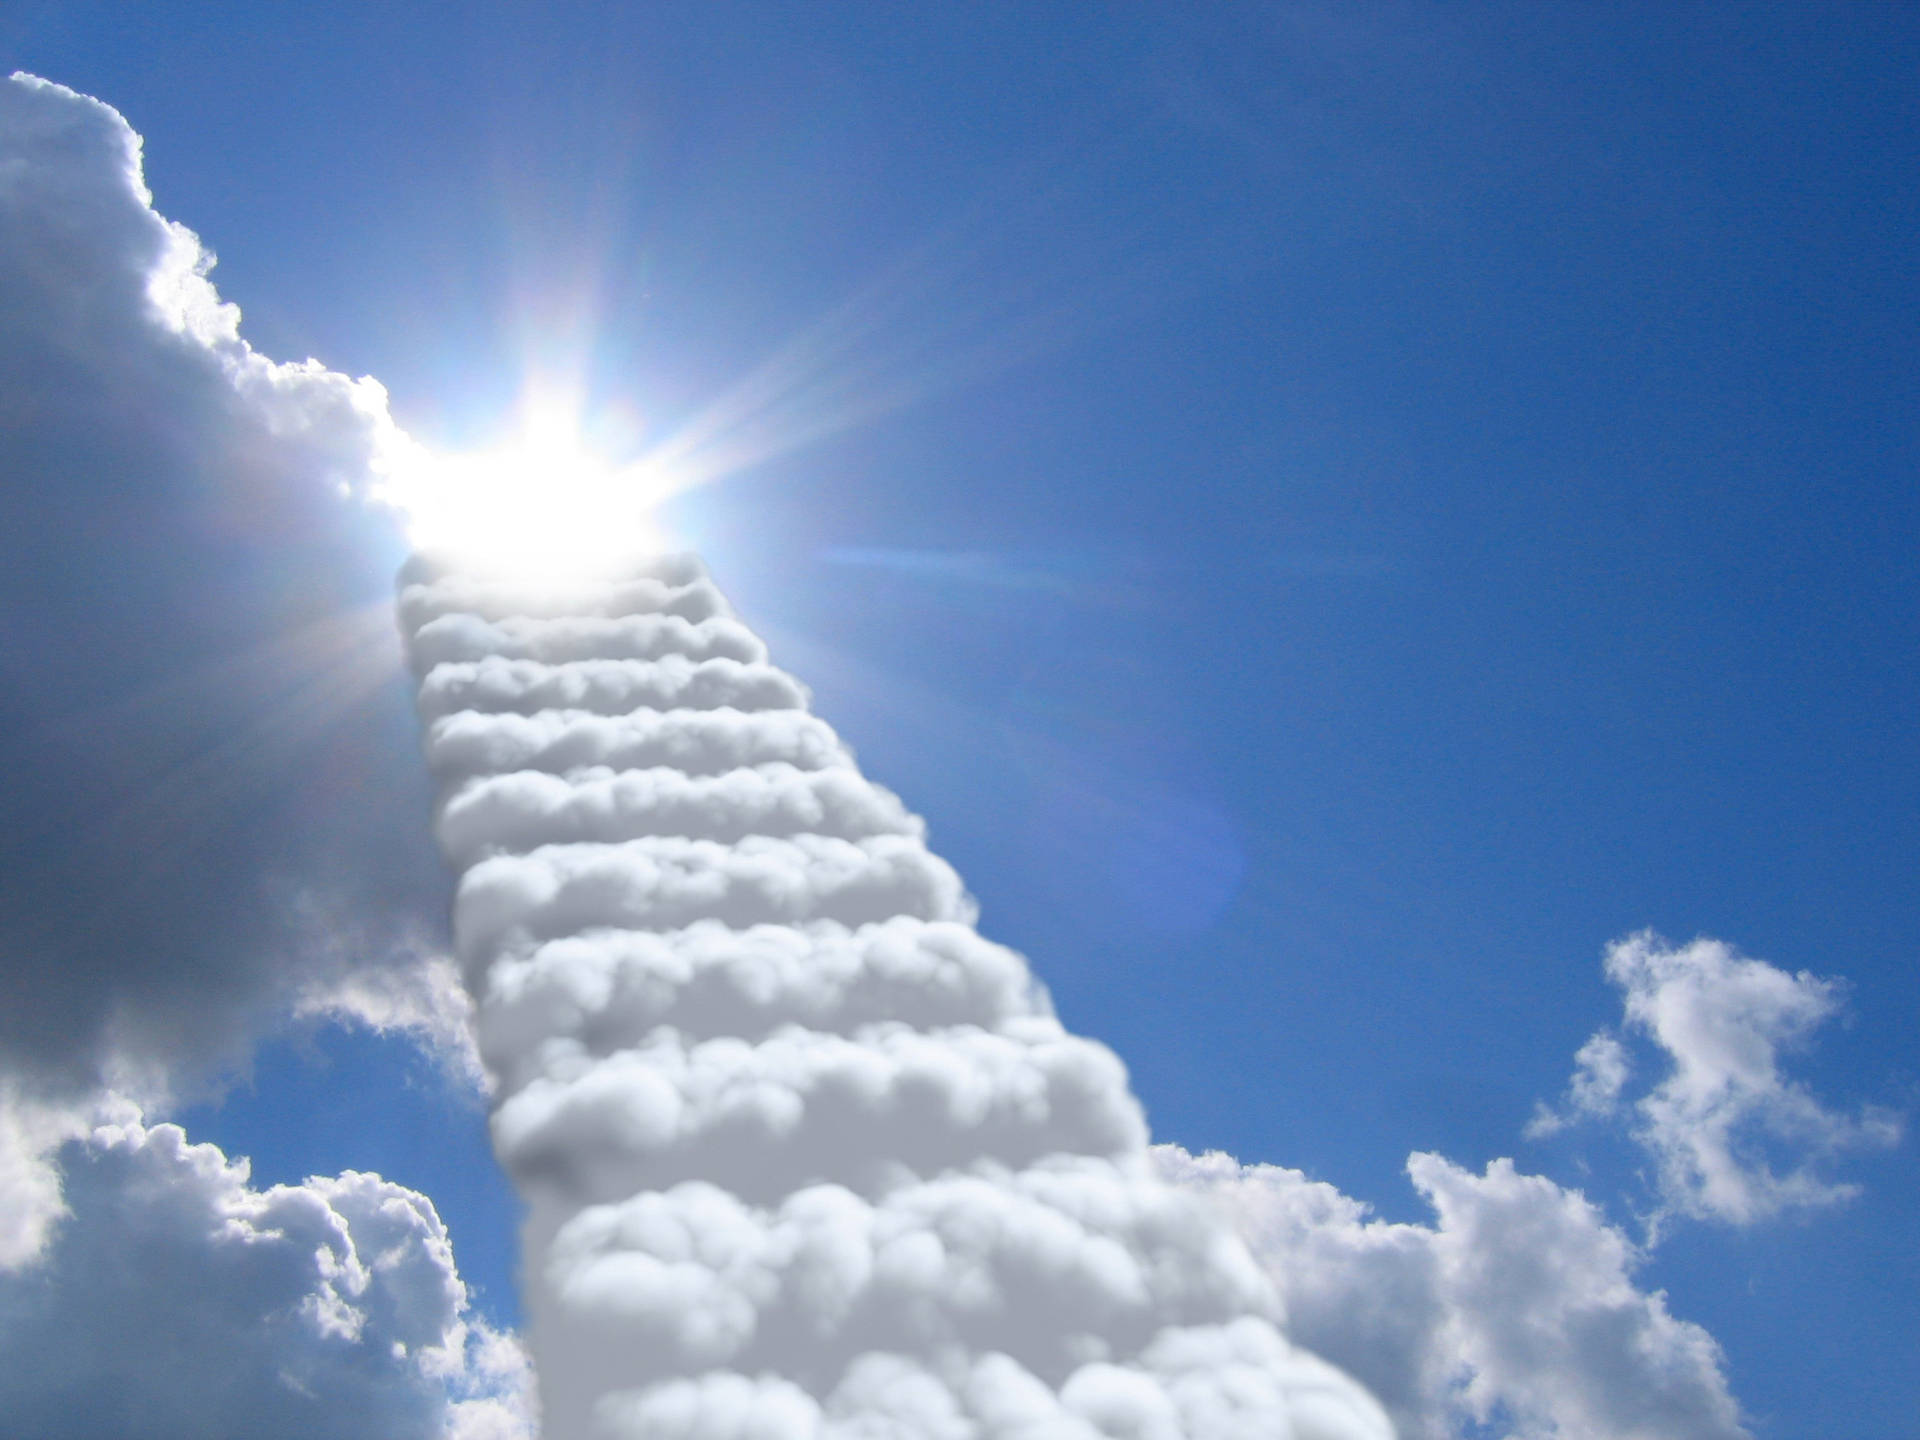 Caption: Majestic Stairway To Heaven Surrounded By Clouds Wallpaper